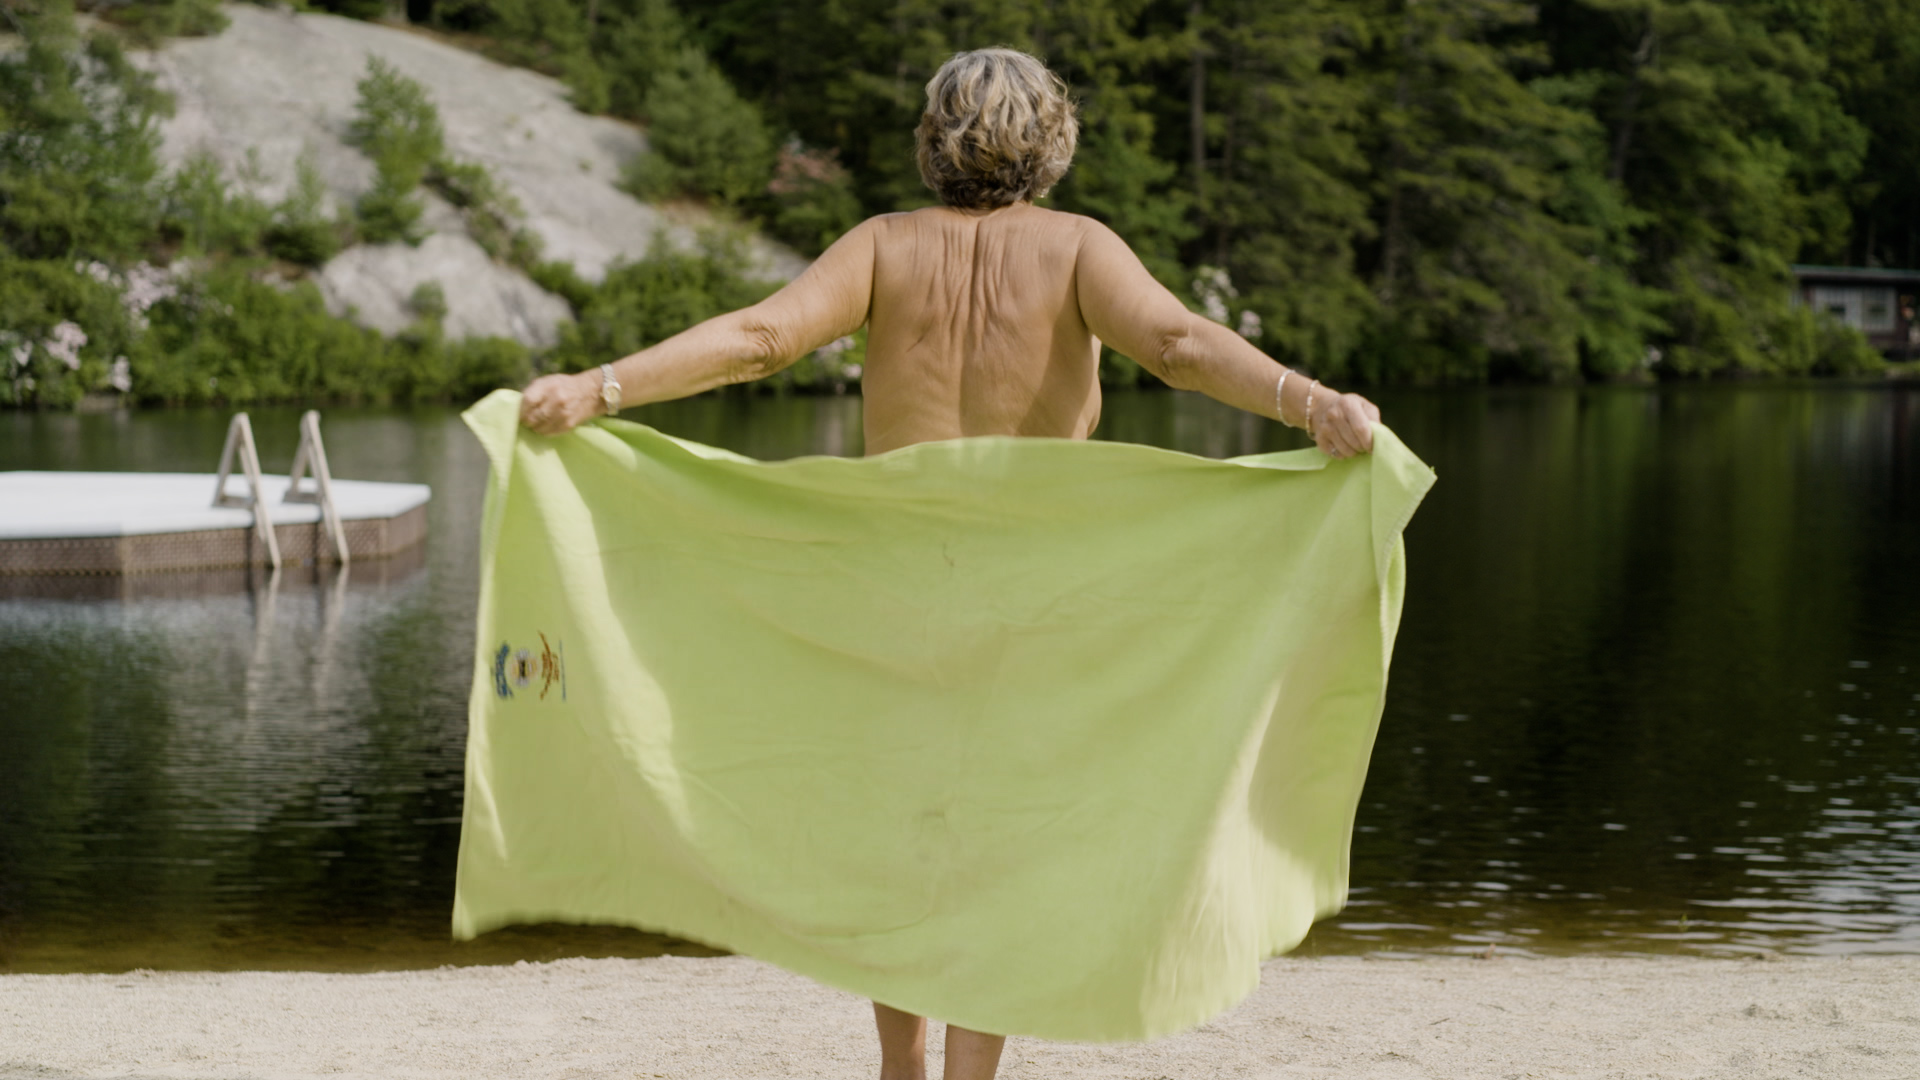 Nudist explains what you should definitely not do at a nude beach pic